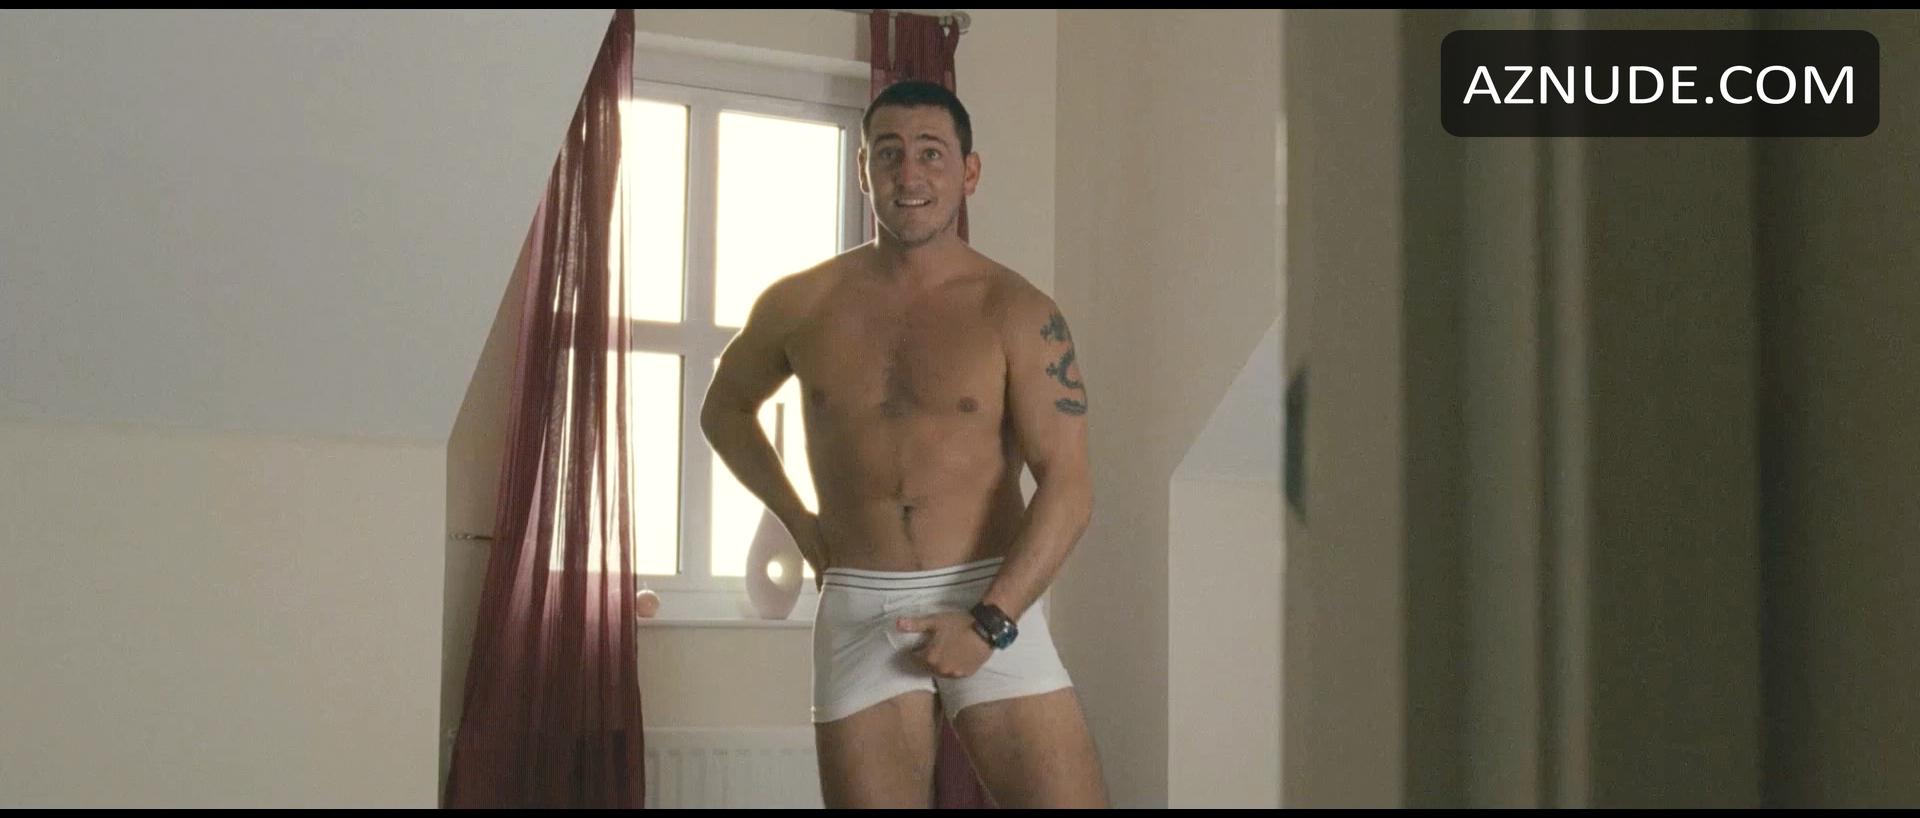 Will mellor nude